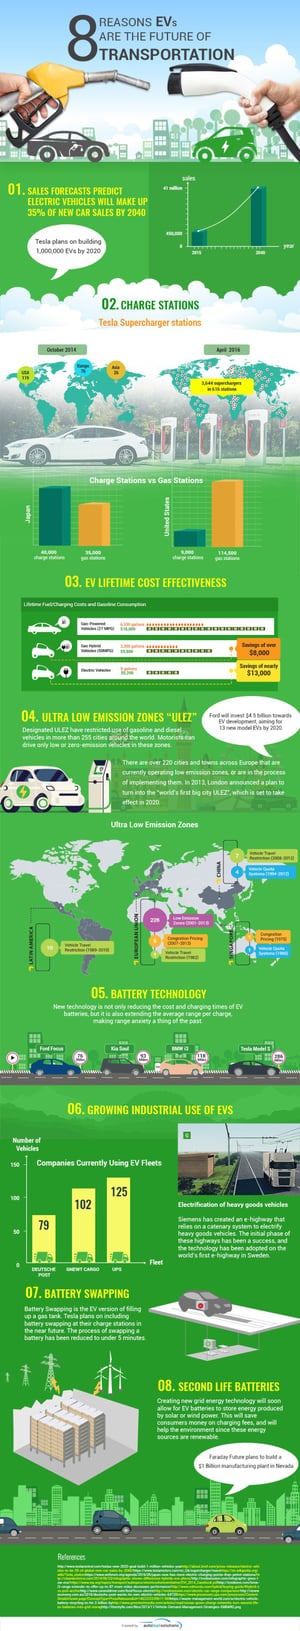 Infographic: How Electric Vehicles are the Future of Transportation